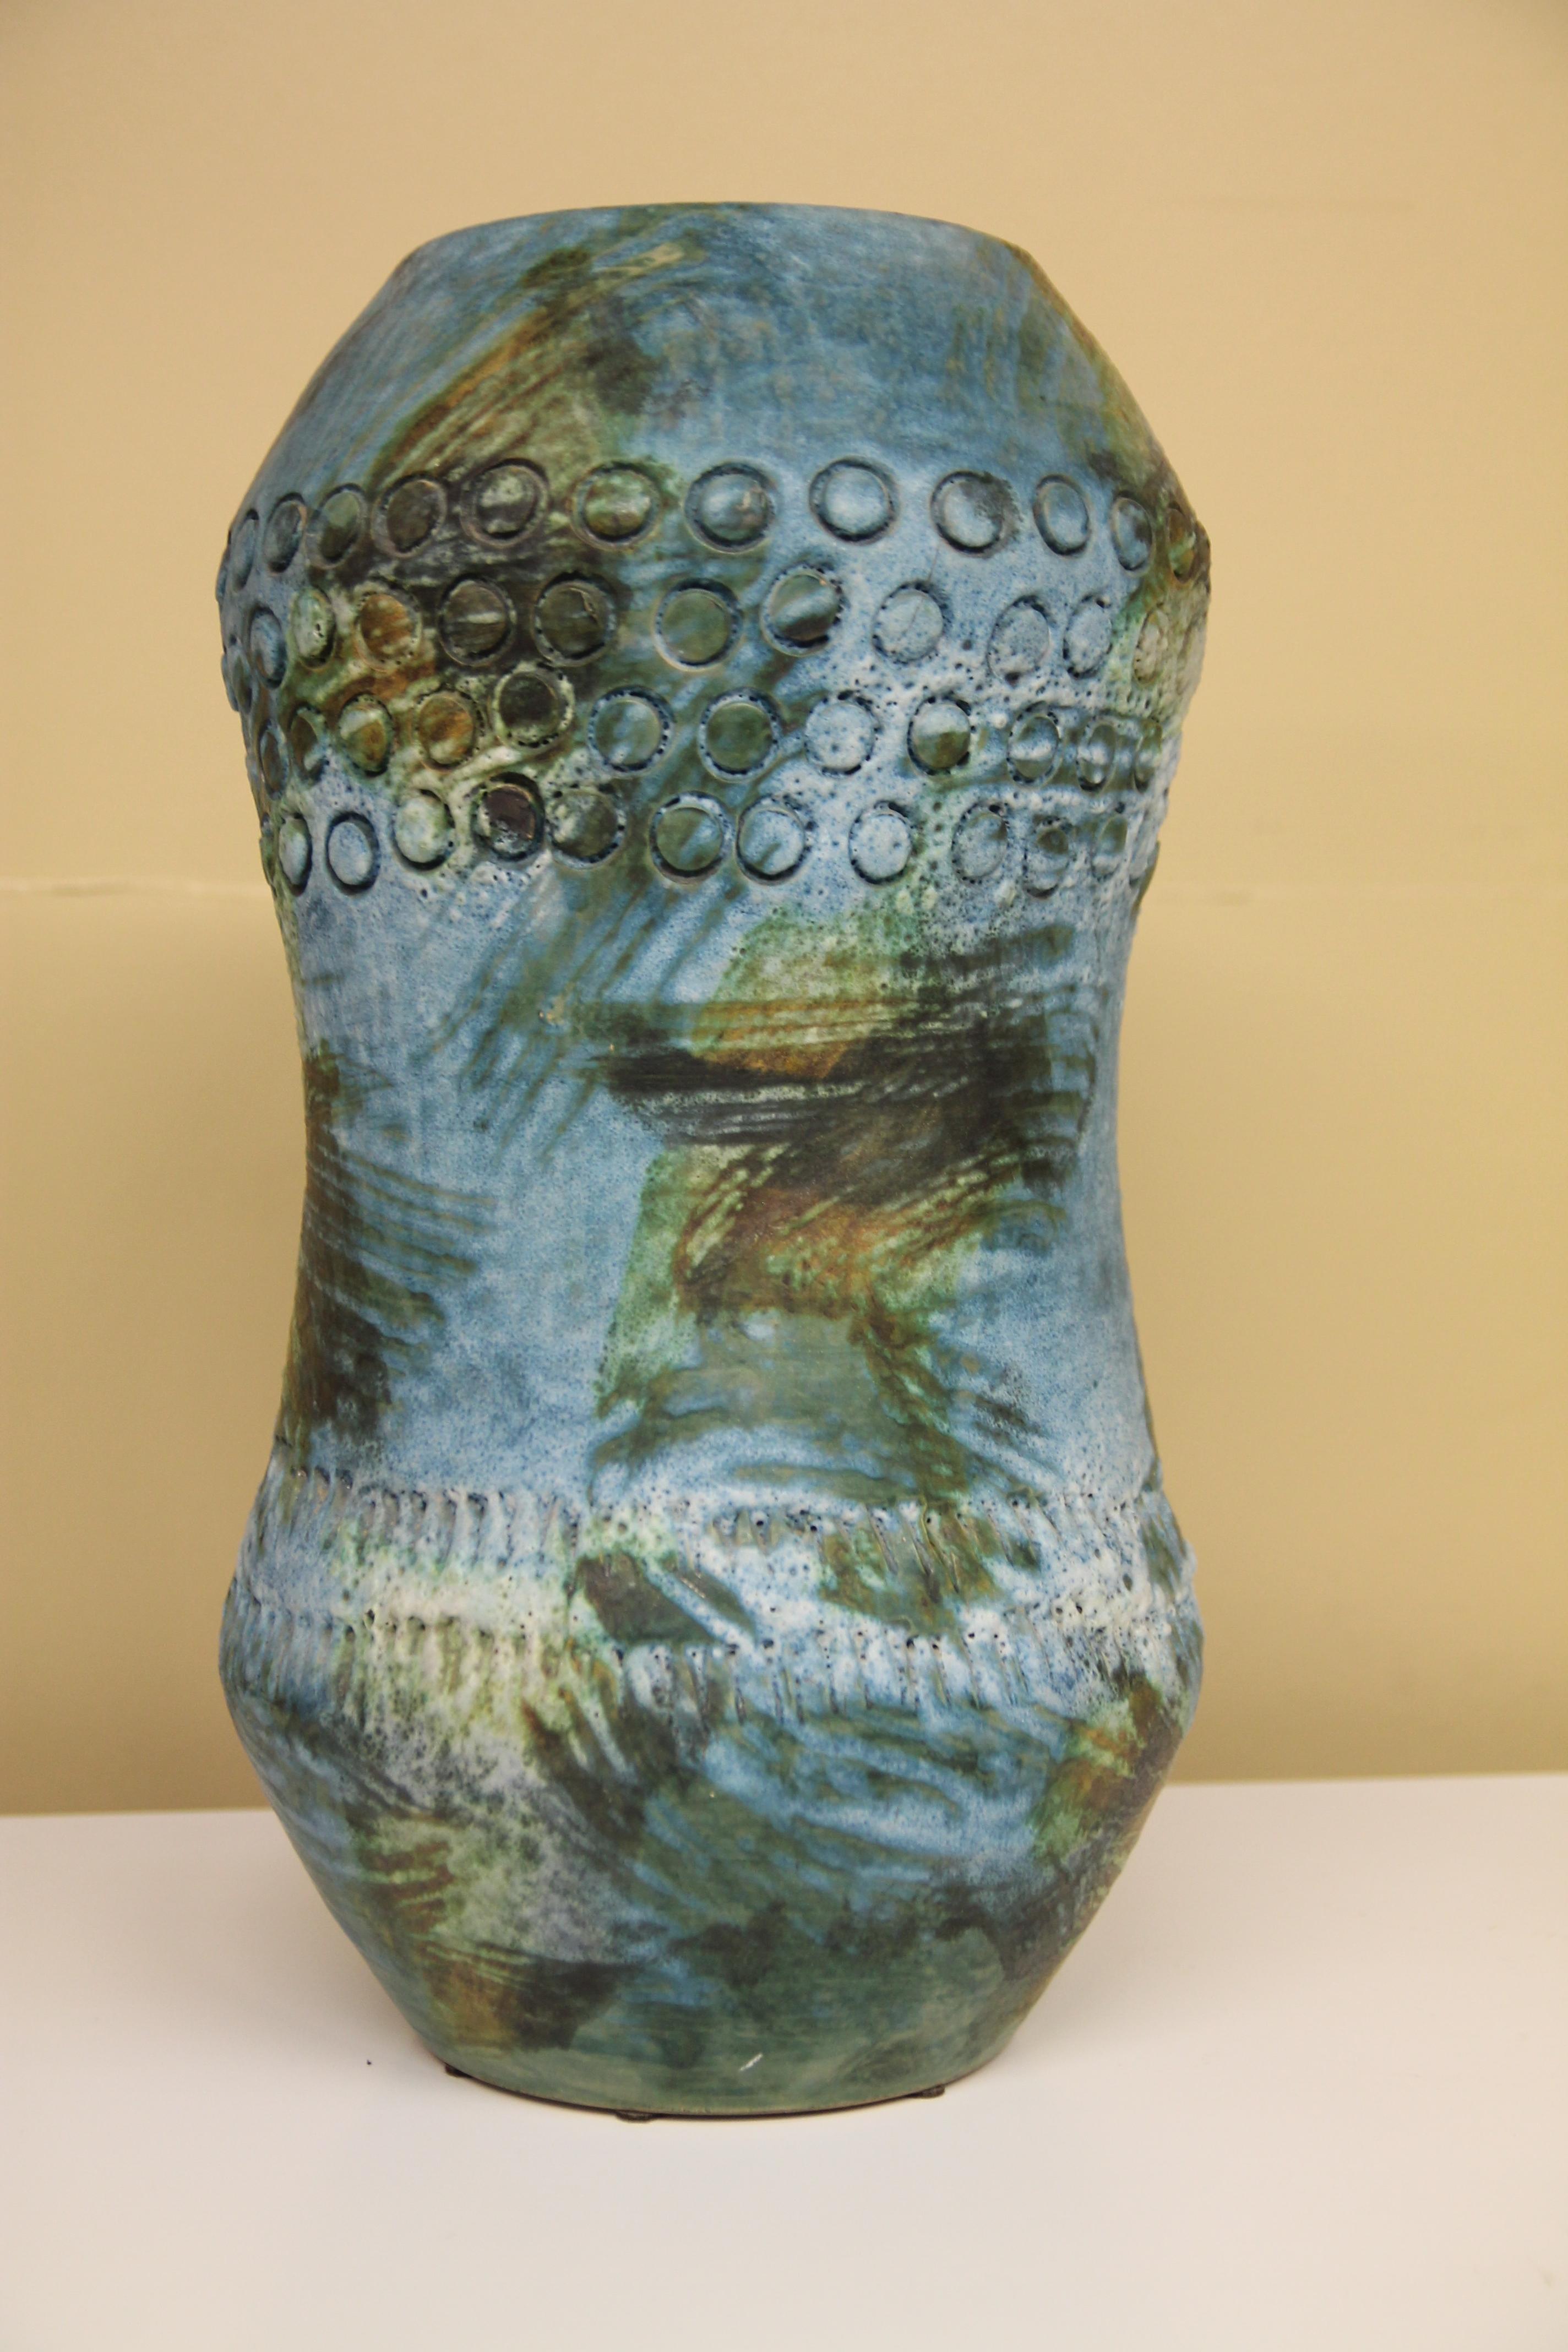 Rarely seen vase this size by Alvino Bagni for Raymor. This 17 inch tall vase is from the 